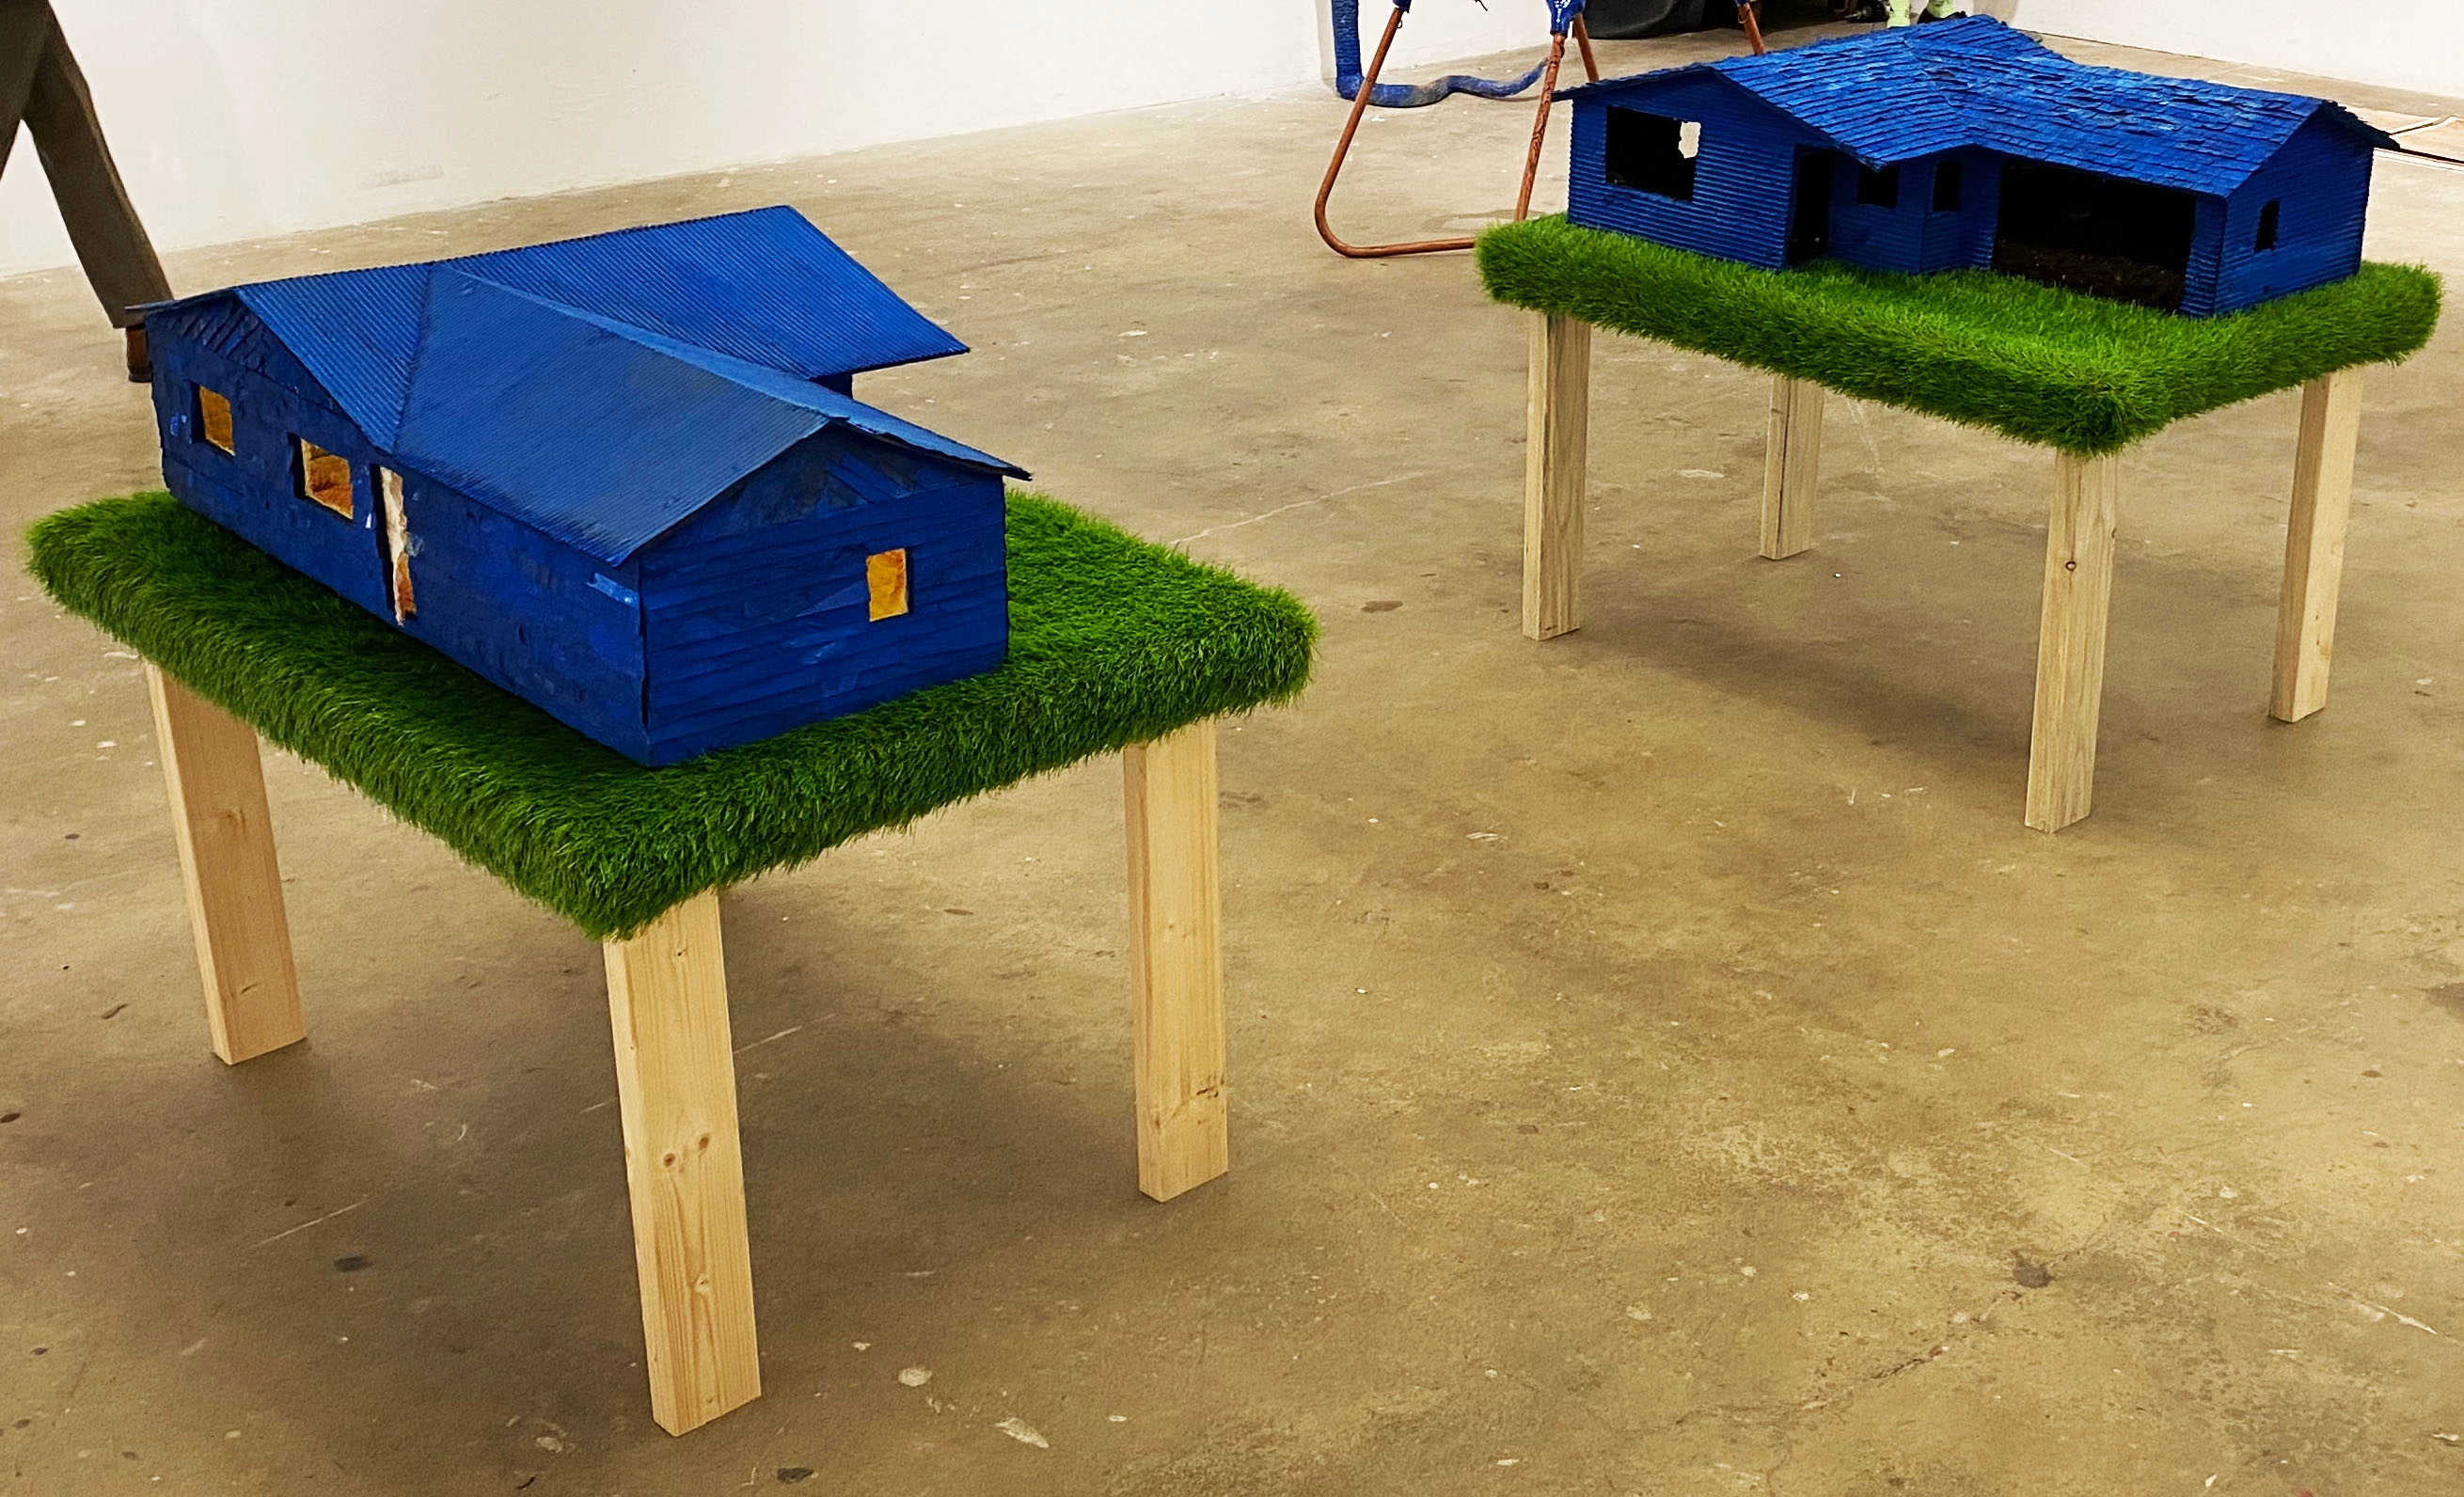 Photograph of two tables with blue model houses on top of green astroturf.